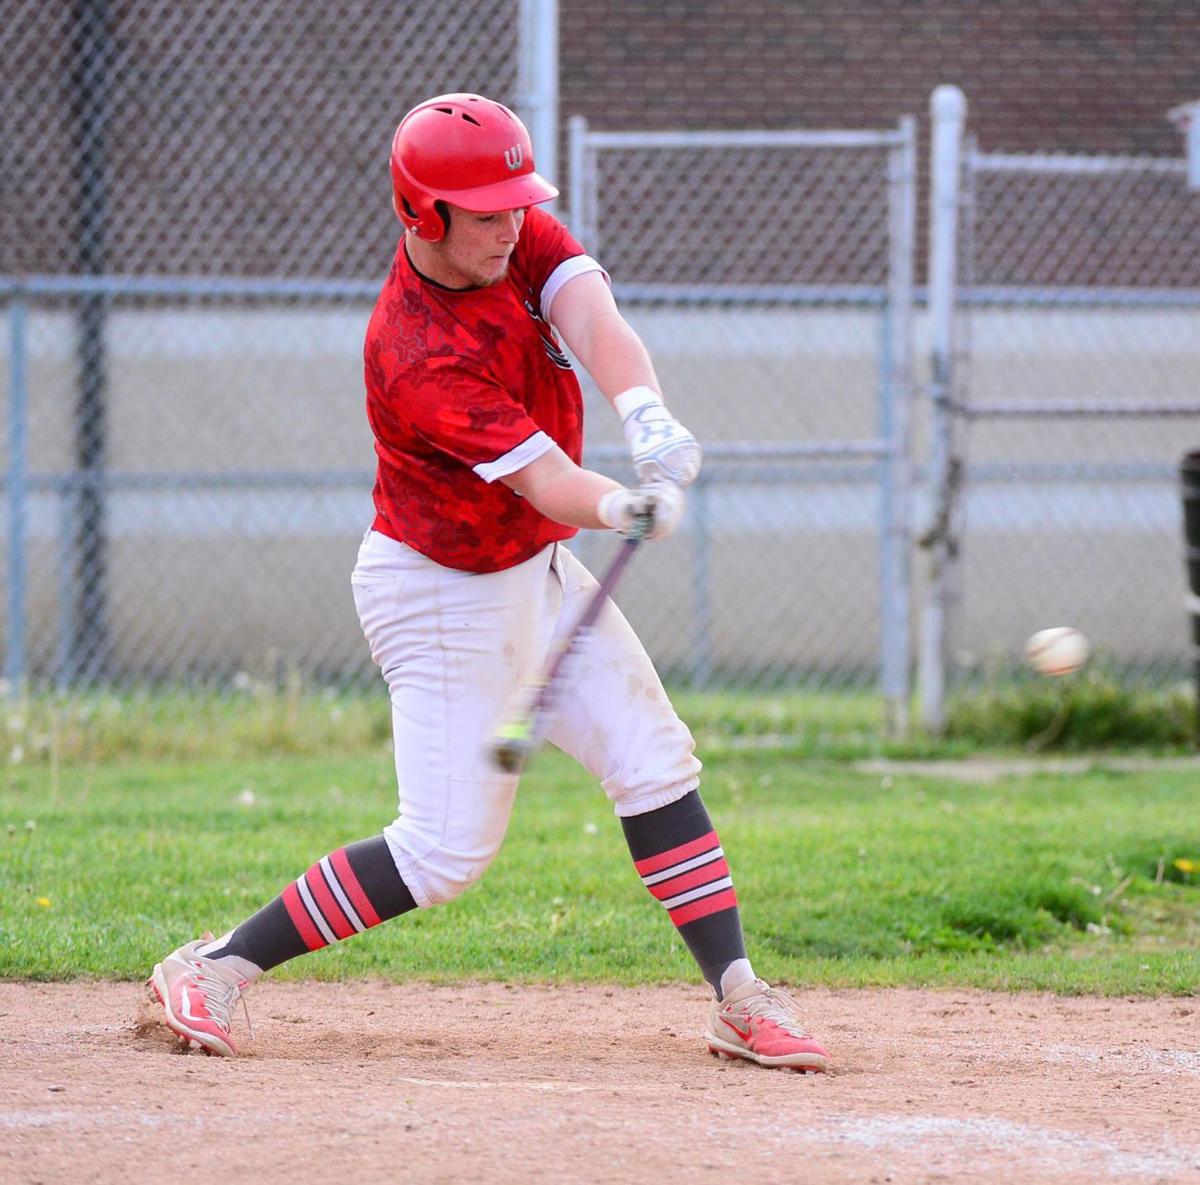 Westfall's Armentrout named All-Ohio | Sports | circlevilleherald.com